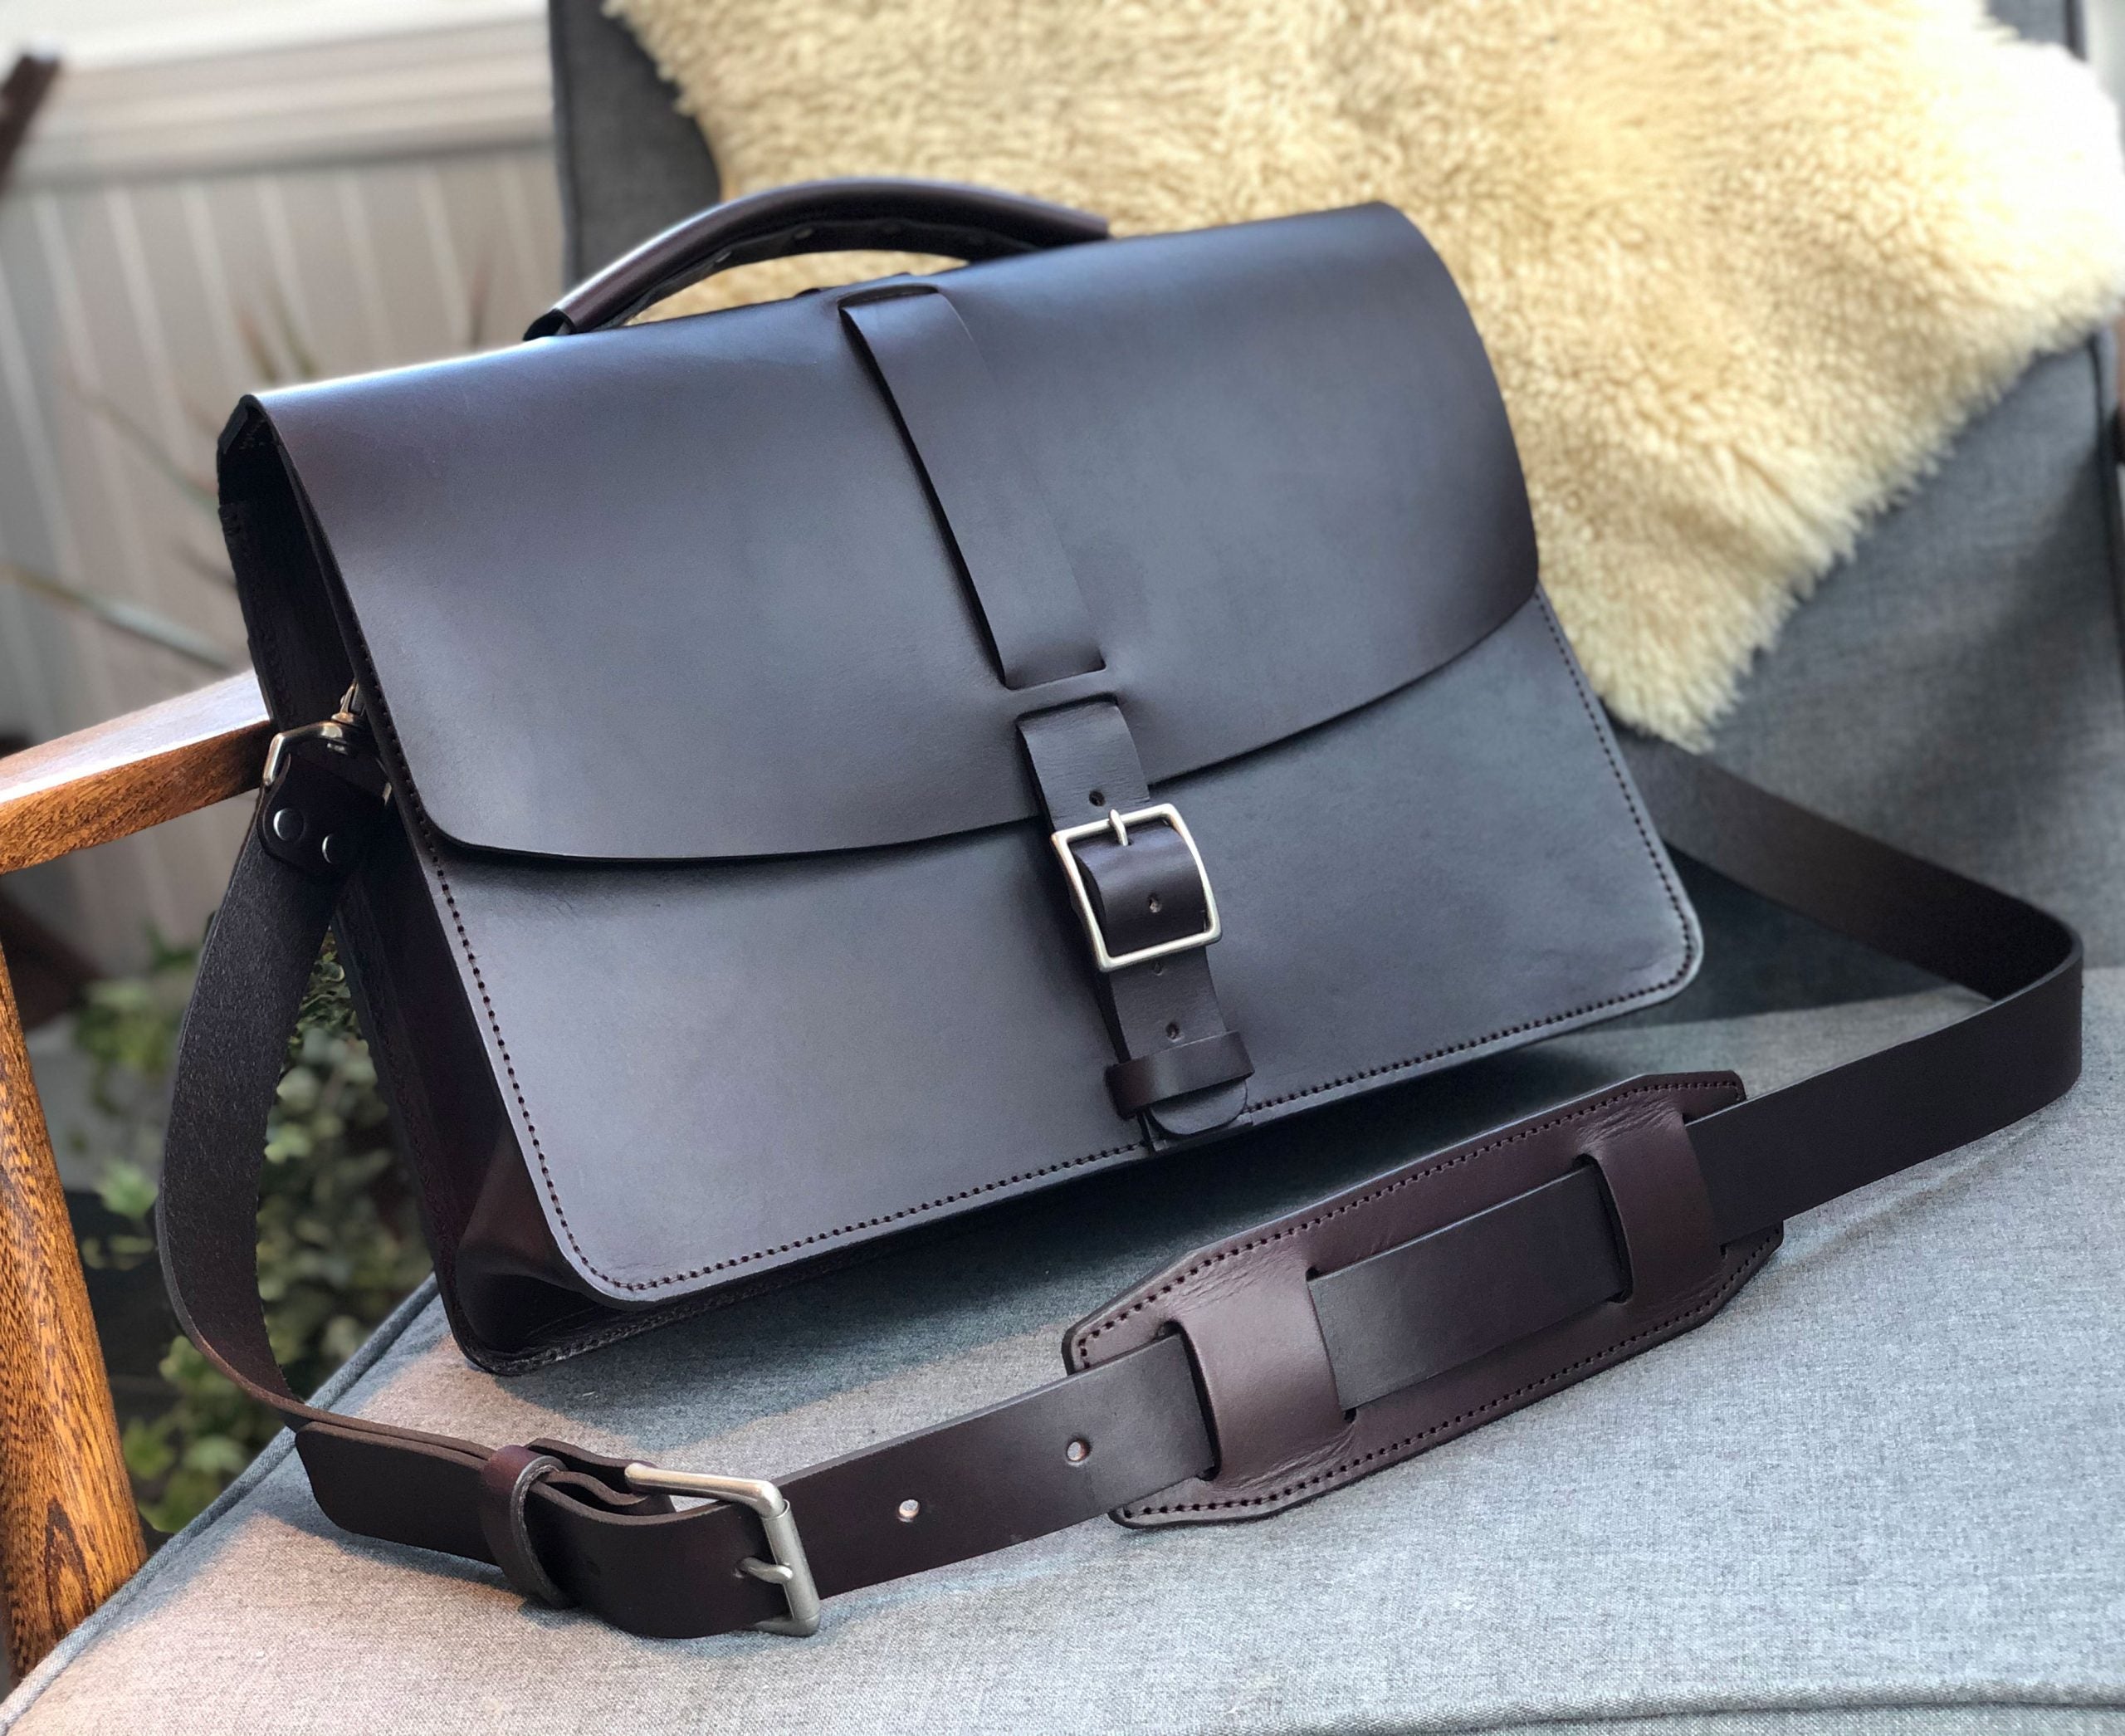 Basader - Fine Hand Crafted Leather Bags and Accessories